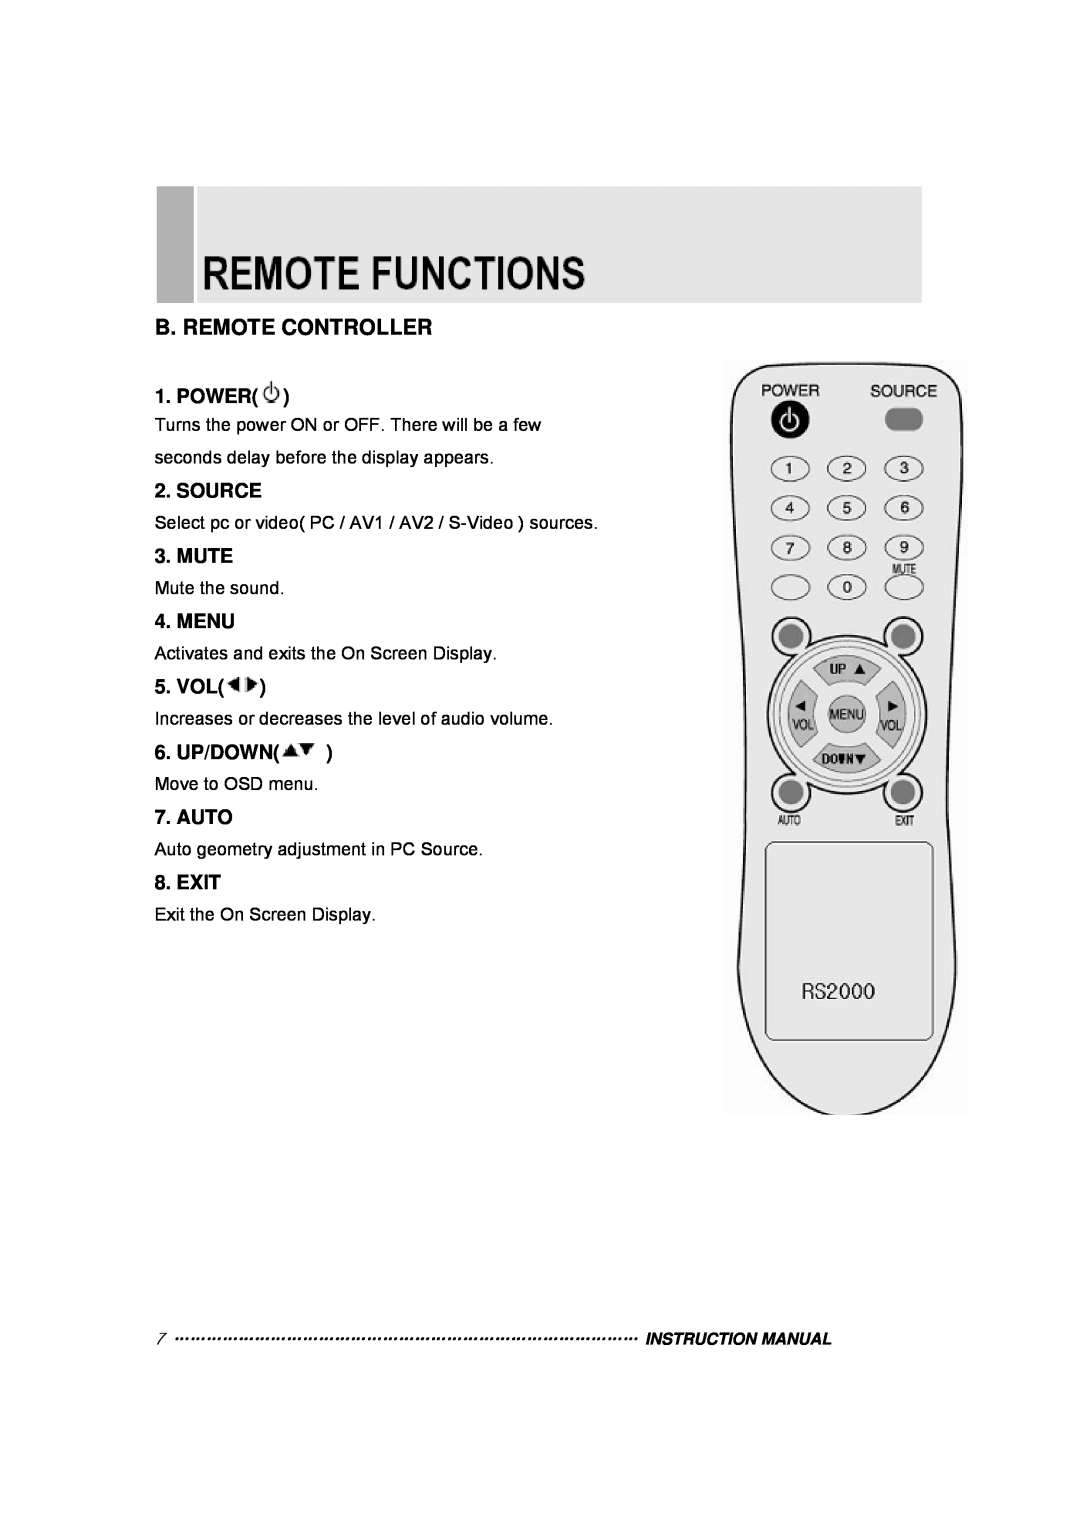 TOA Electronics 15RTV instruction manual B. Remote Controller, Power, Source, Mute, Menu, Vol, 6. UP/DOWN, Auto, Exit 